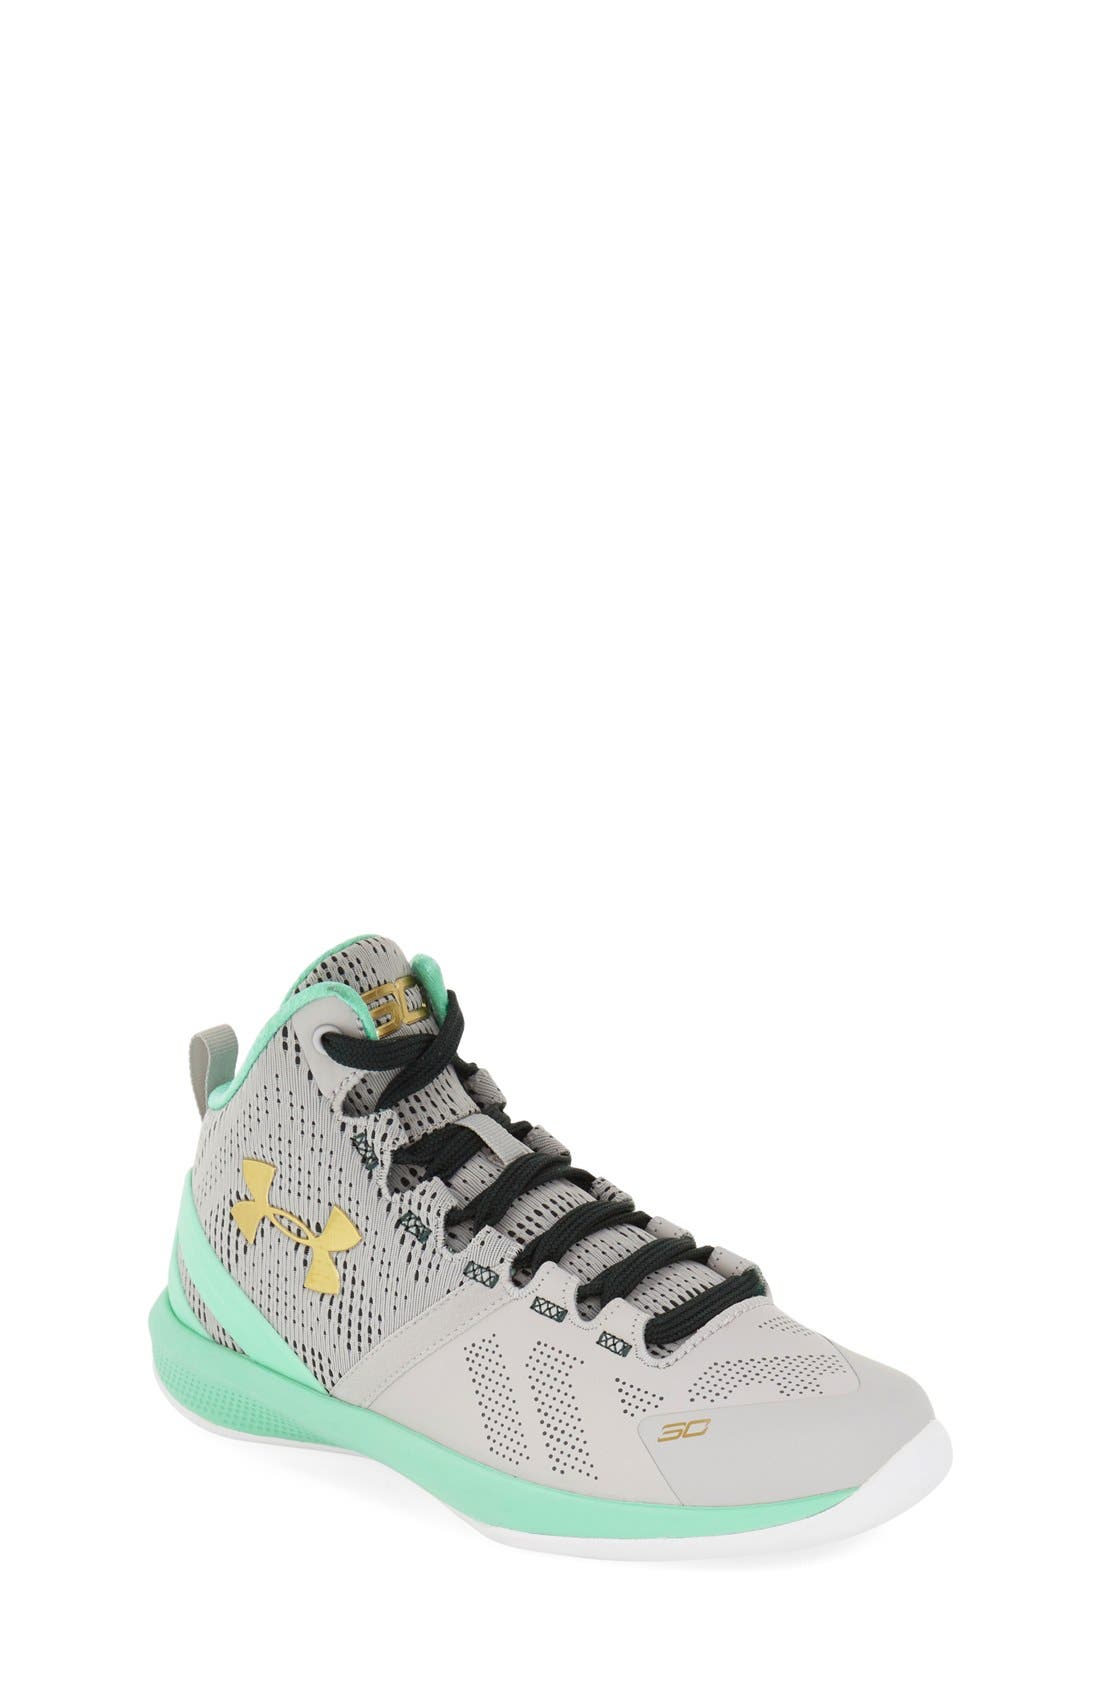 curry 2 white kids